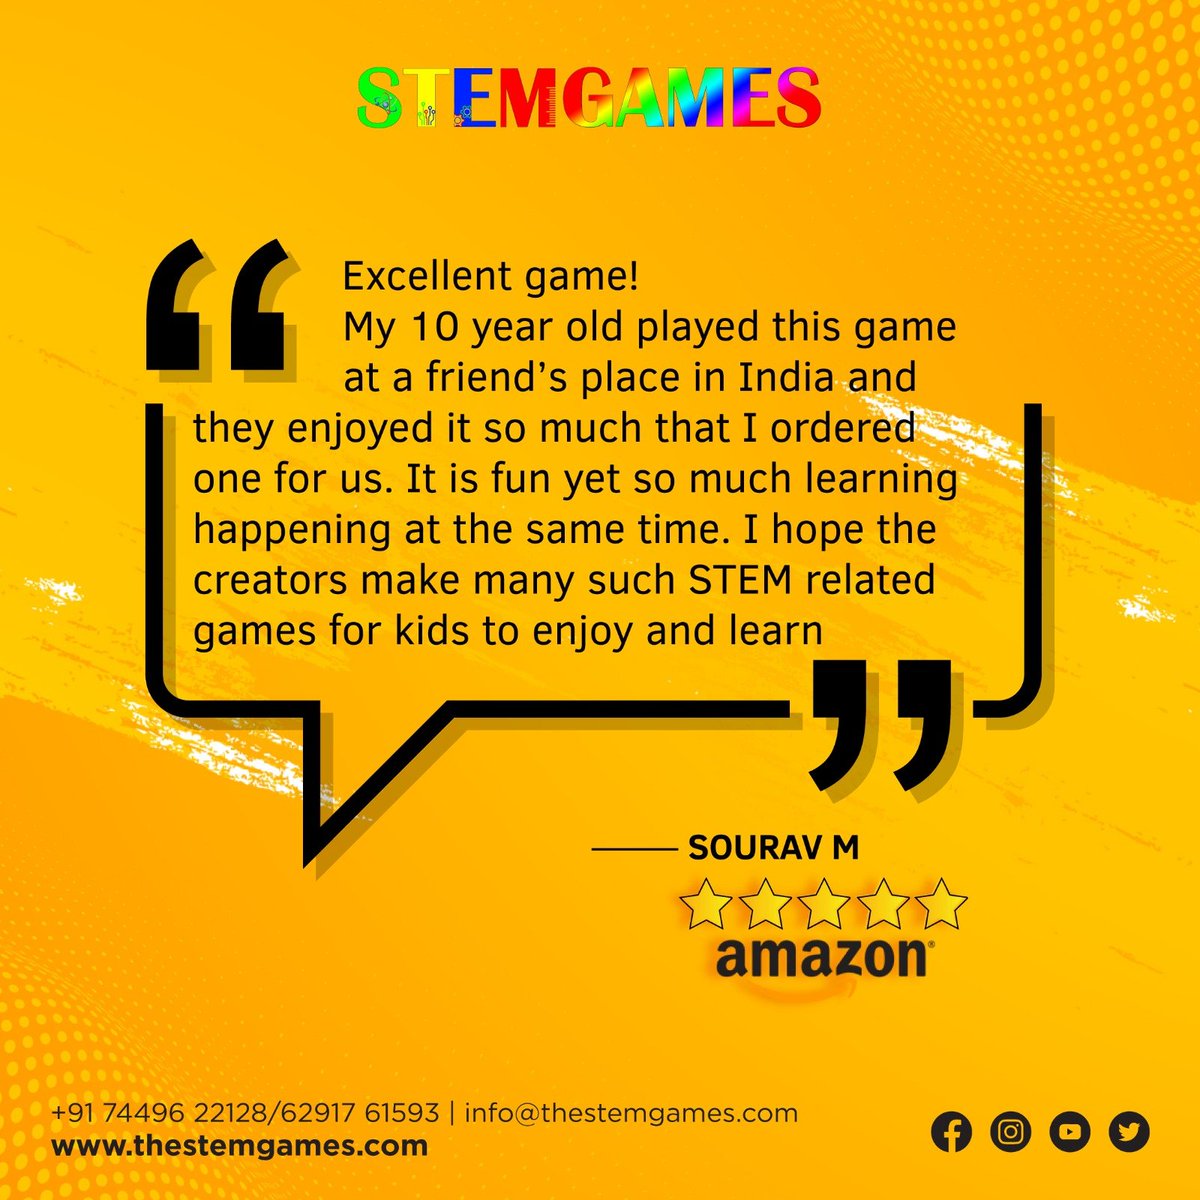 Take a sneak peek to some of our best customer's testimonials
.
#Stemgames #newgame #newchallenge #games #surprise #boardgame #board #singleplayer #indoorgame #indoor #boardgames #boardgamesaddict #indoorgames #fun #puzzles #brain #science #inntelectual #interesting #testimonials